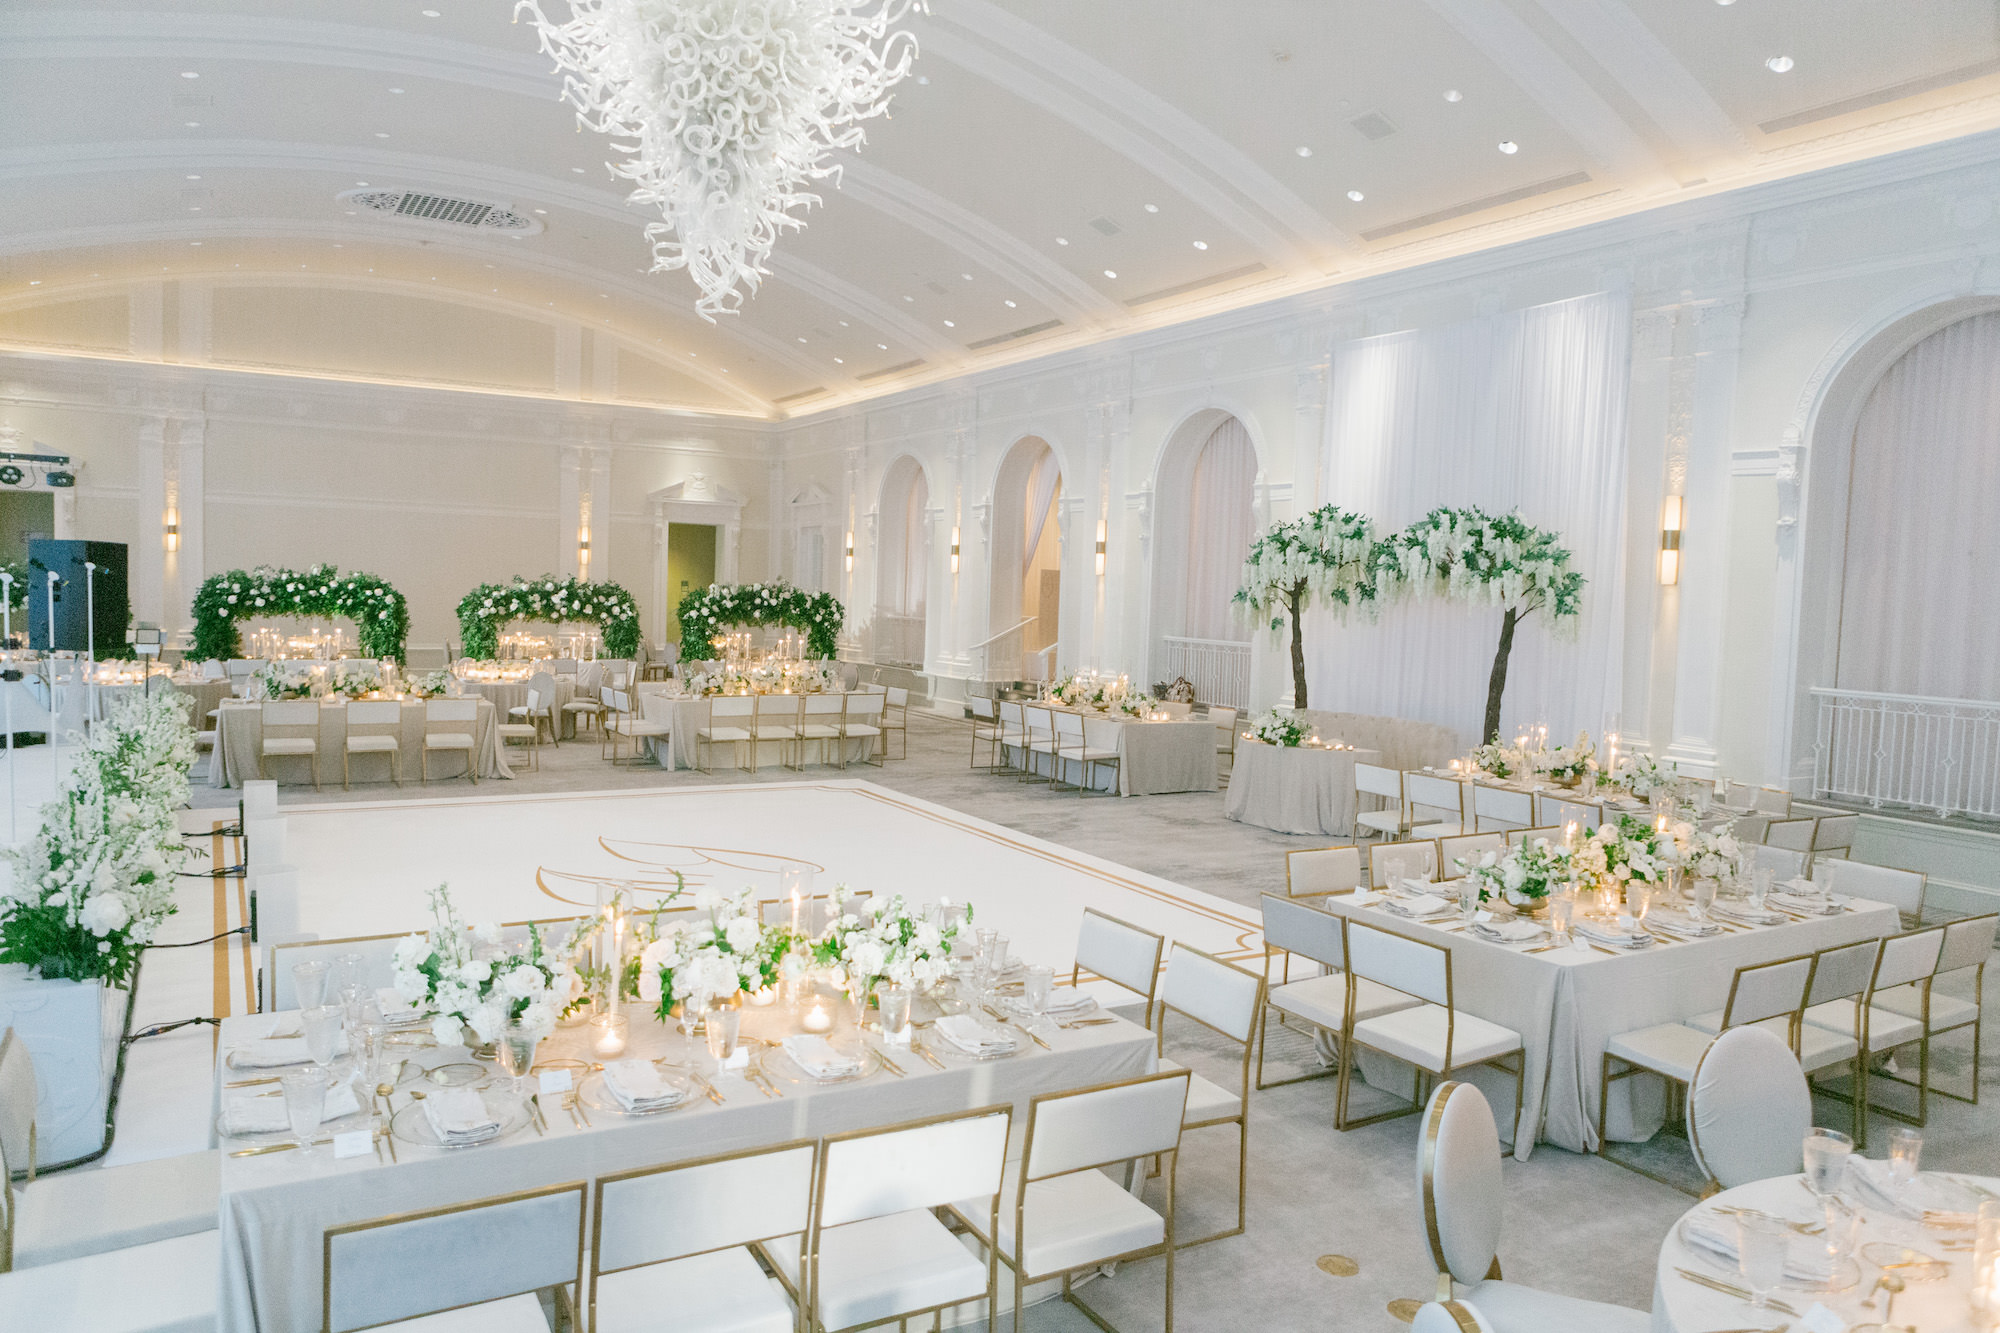 Luxurious White and Gold Wedding Reception Floral Inspiration with Greenery | St Petersburg Ballroom Venue The Vinoy Renaissance | Tampa Bay Rental A Chair Affair | St Pete Planner Parties A'La Carte | Over the Top Linen Rental